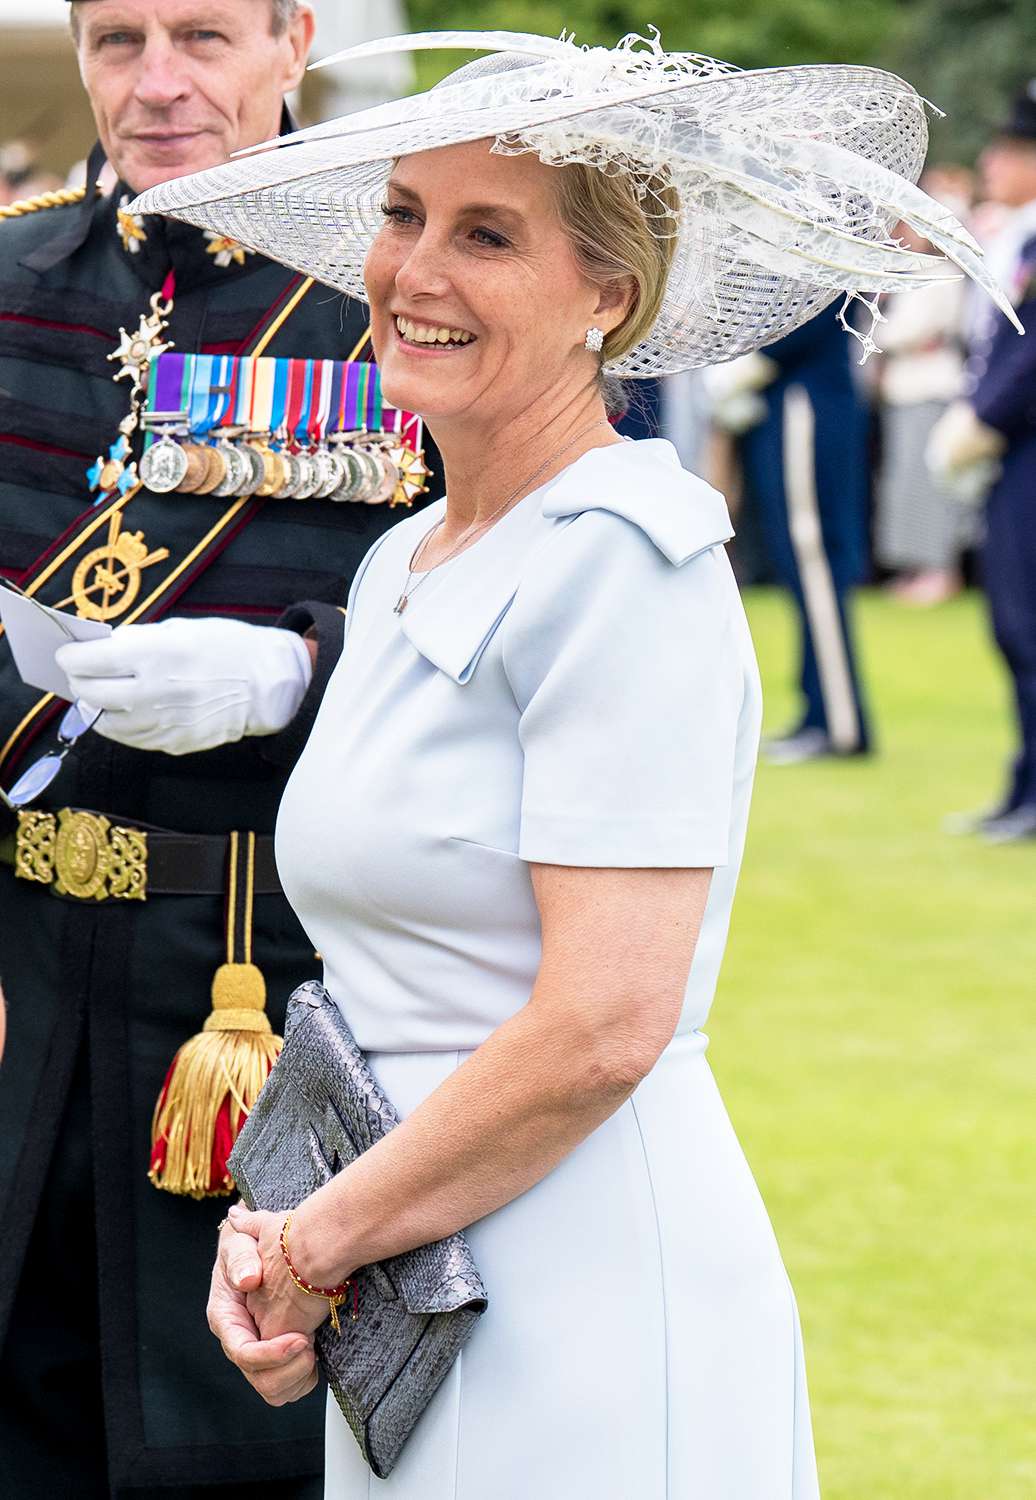 Sophie, Duchess of Edinburgh greets guests during the Sovereign's Garden Party held at the Palace of Holyroodhouse, which is part of the King's trip to Scotland for Holyrood Week, on July 2, 2024 in Edinburgh, Scotland.